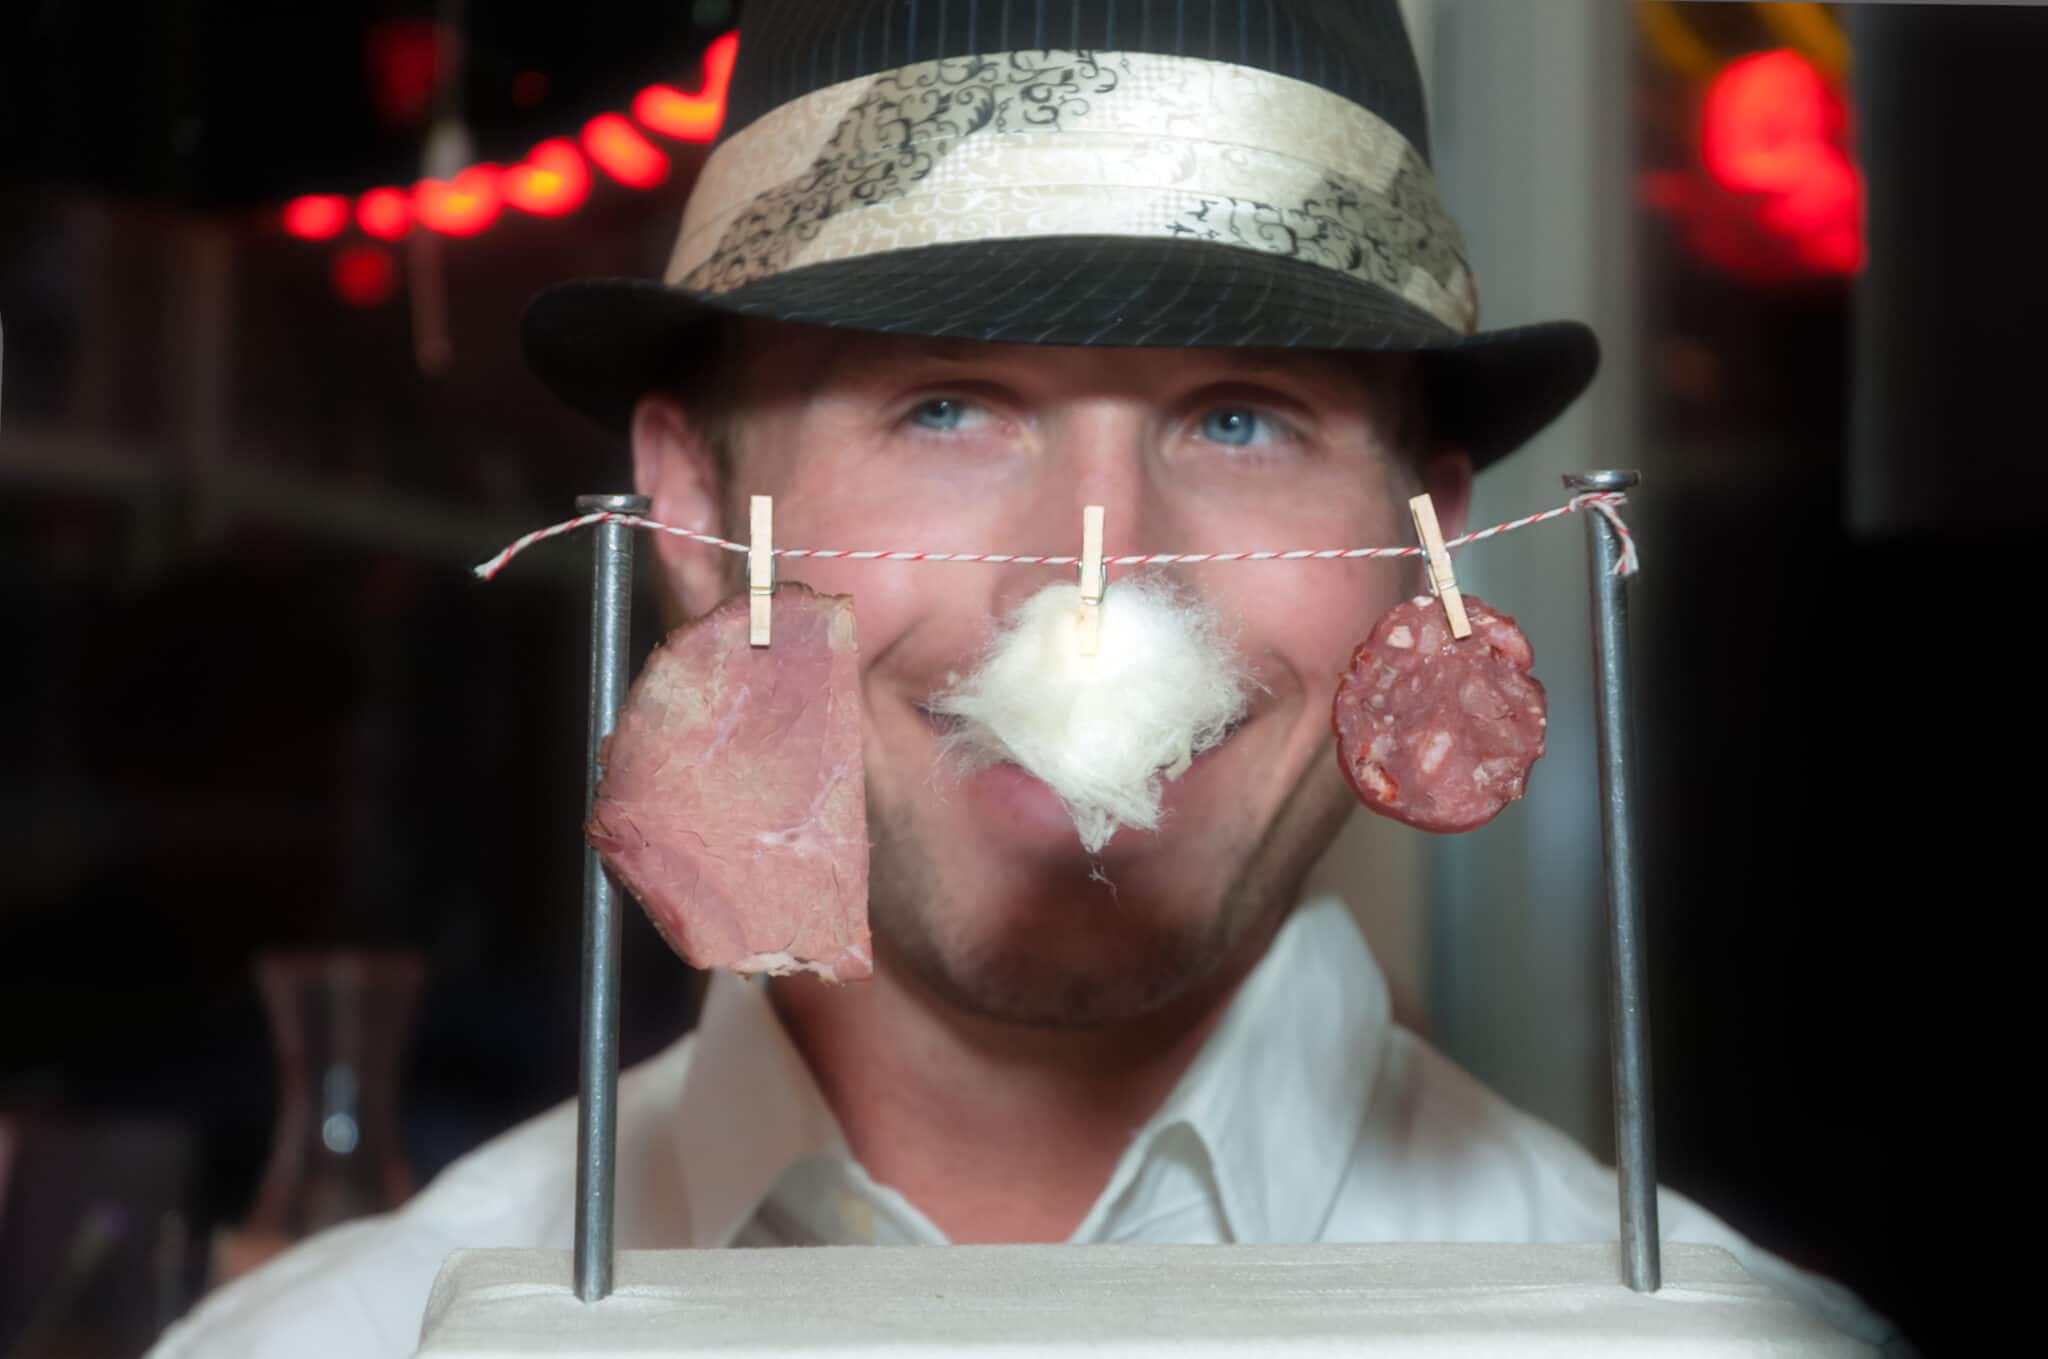 A man wearing a brimmed dress hat playful places his face behind a clothesline of charcuterie at Chef. Katie's pop up restaurant event.